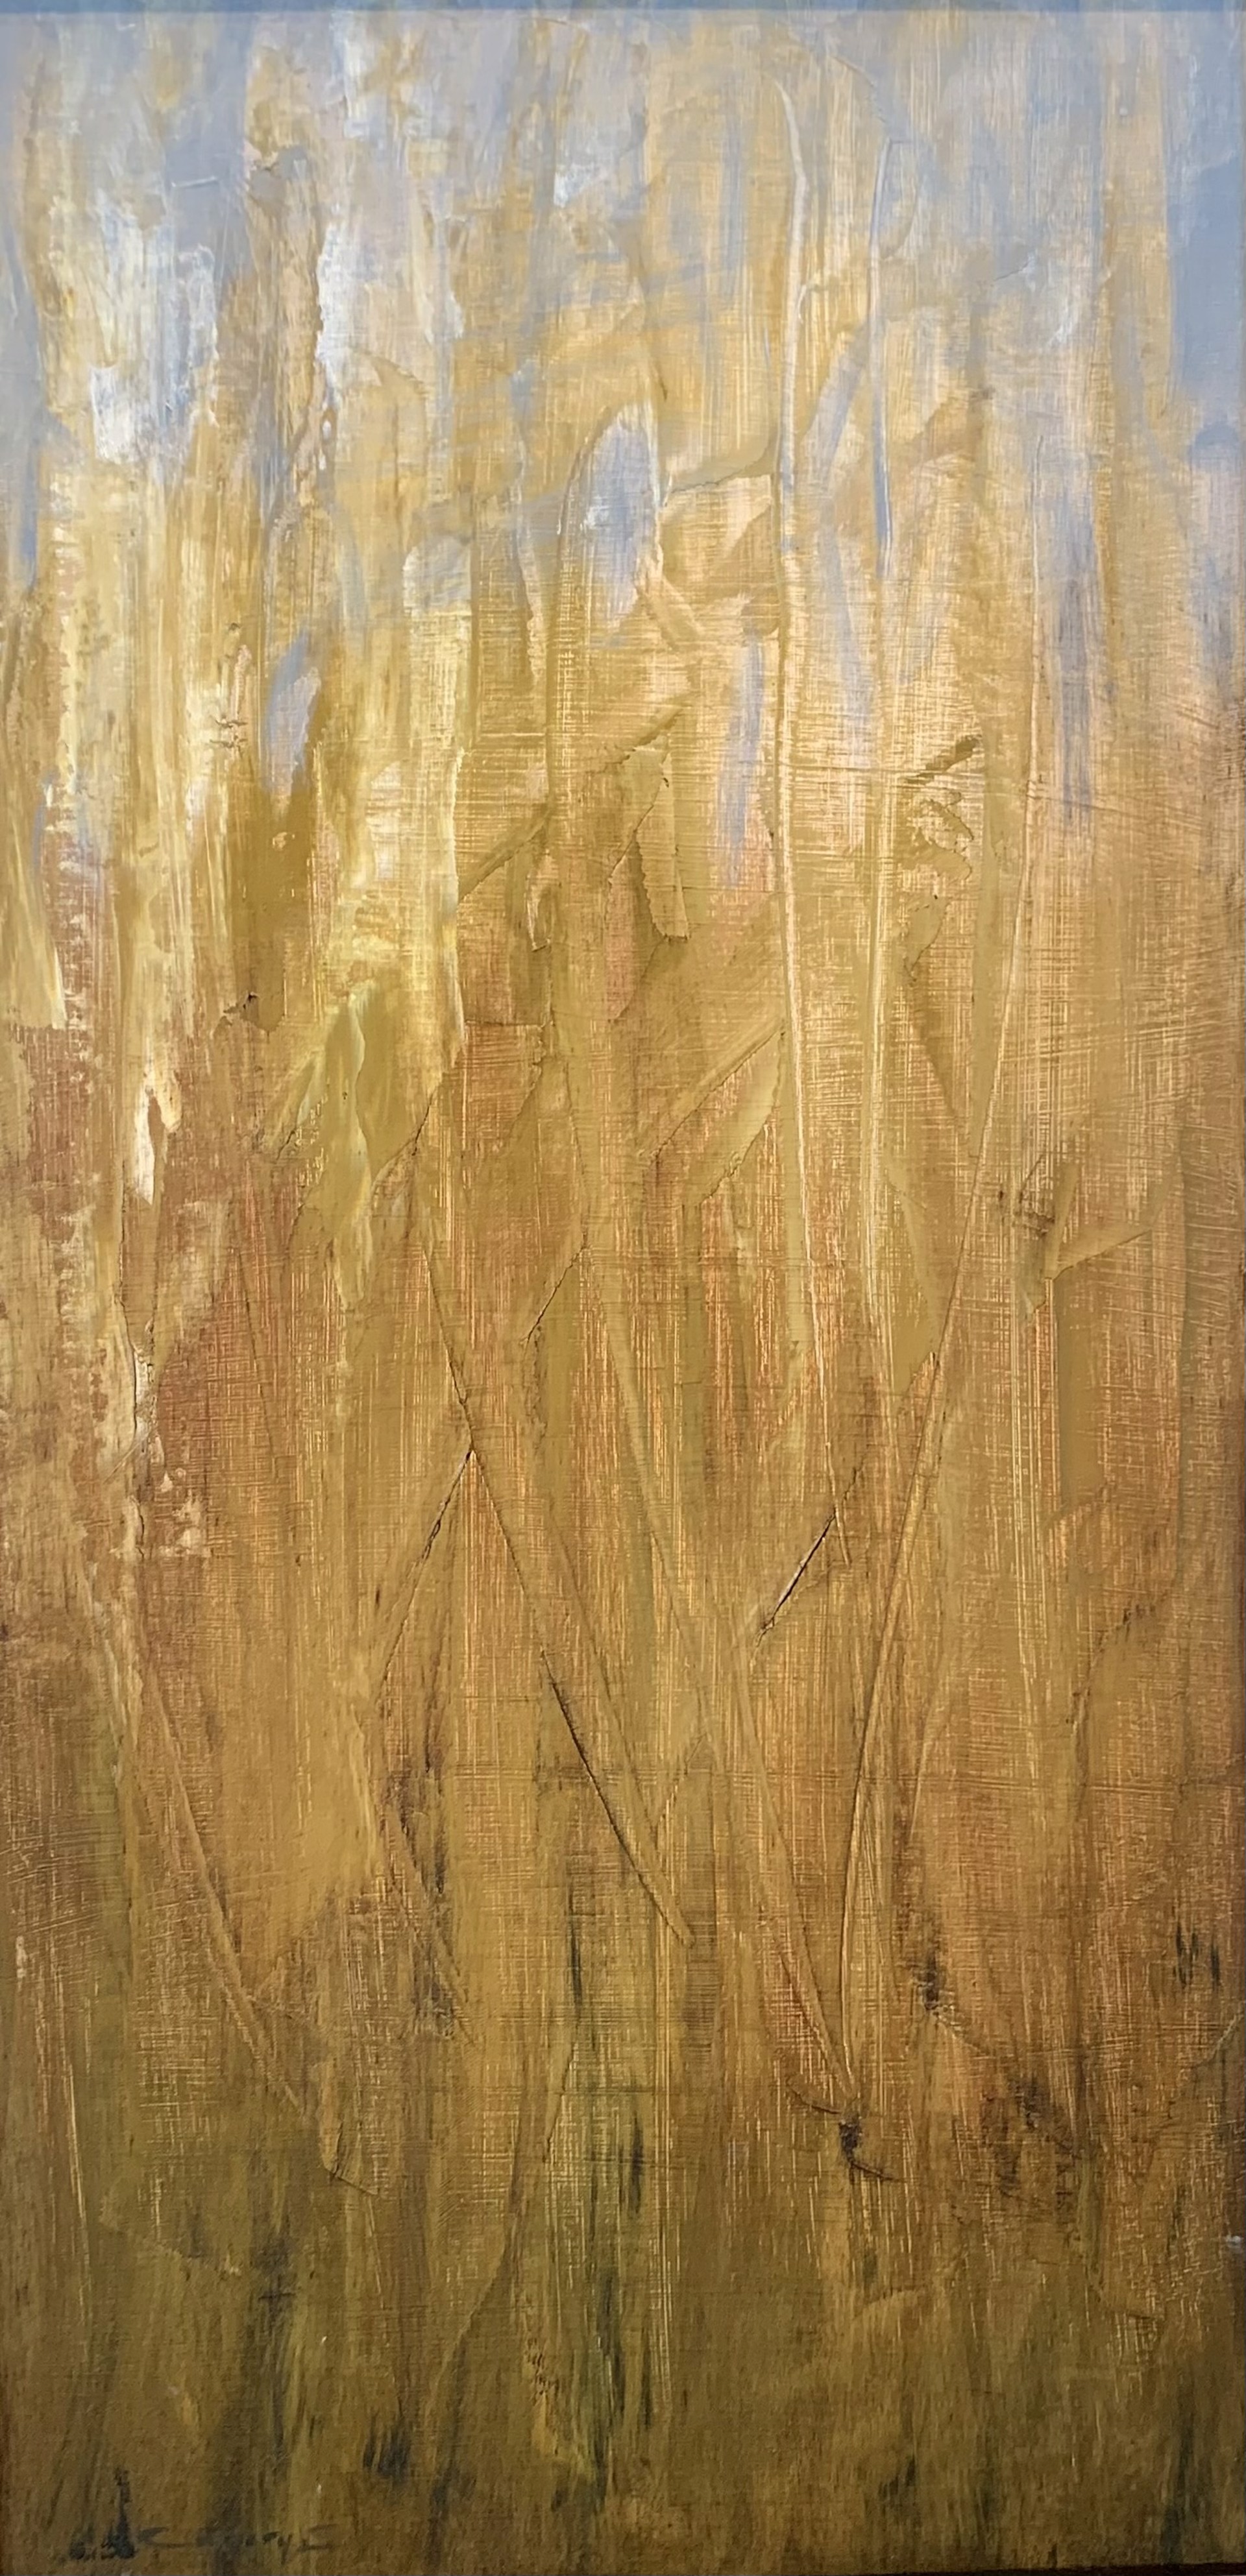 Tall Grass by Gregory Smith